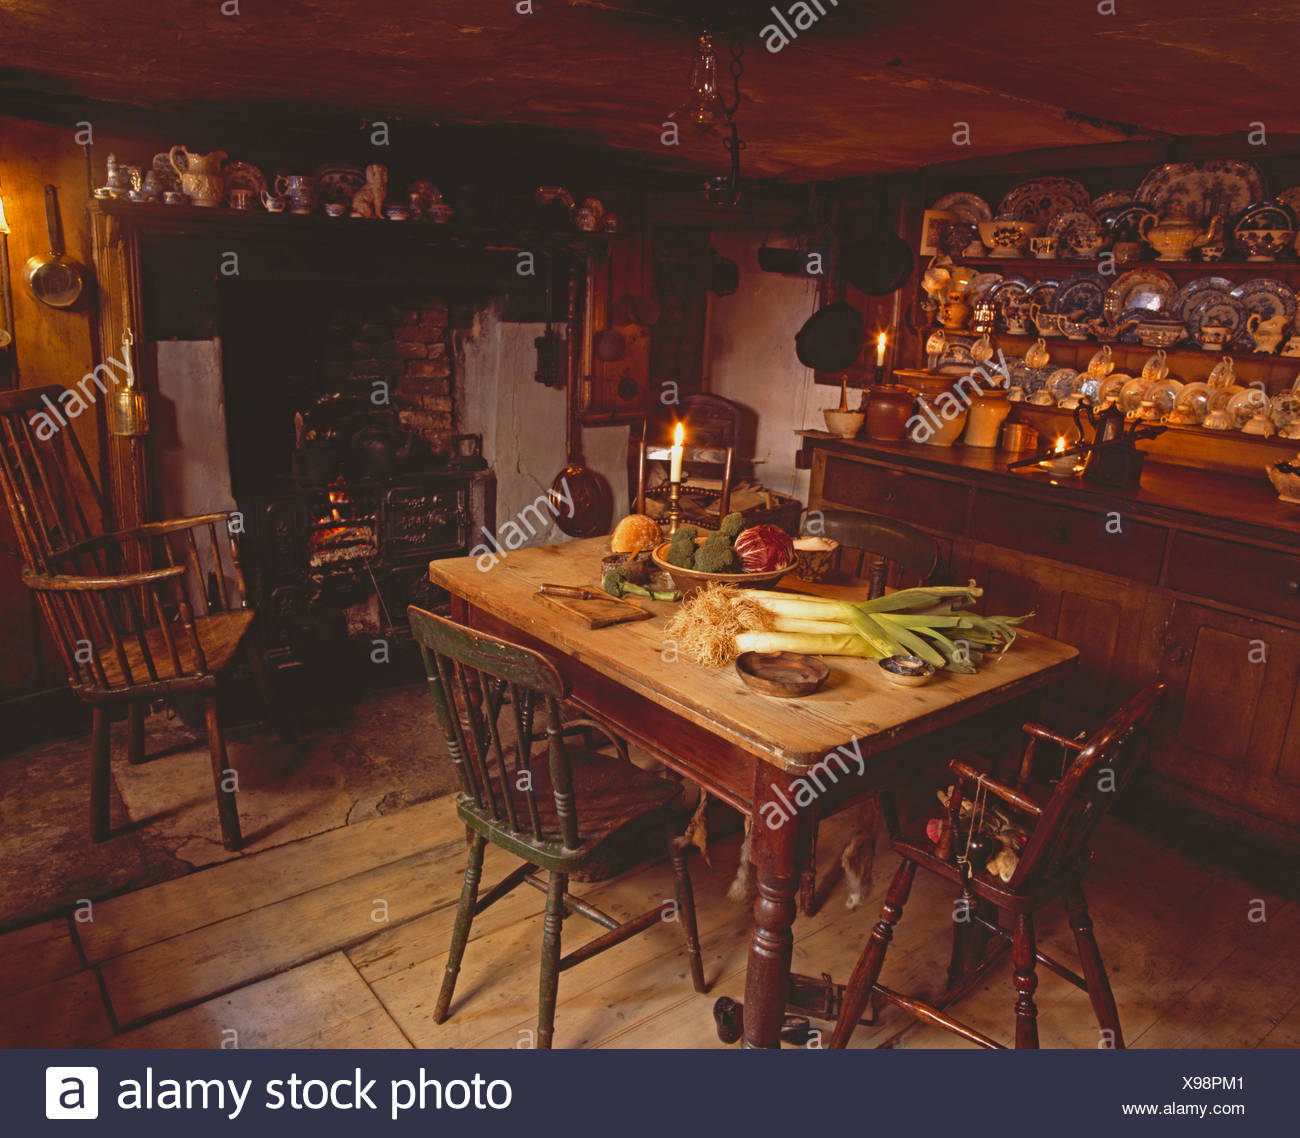 Vegetables On Scrubbed Pine Table In Low Ceilinged Old Fashioned